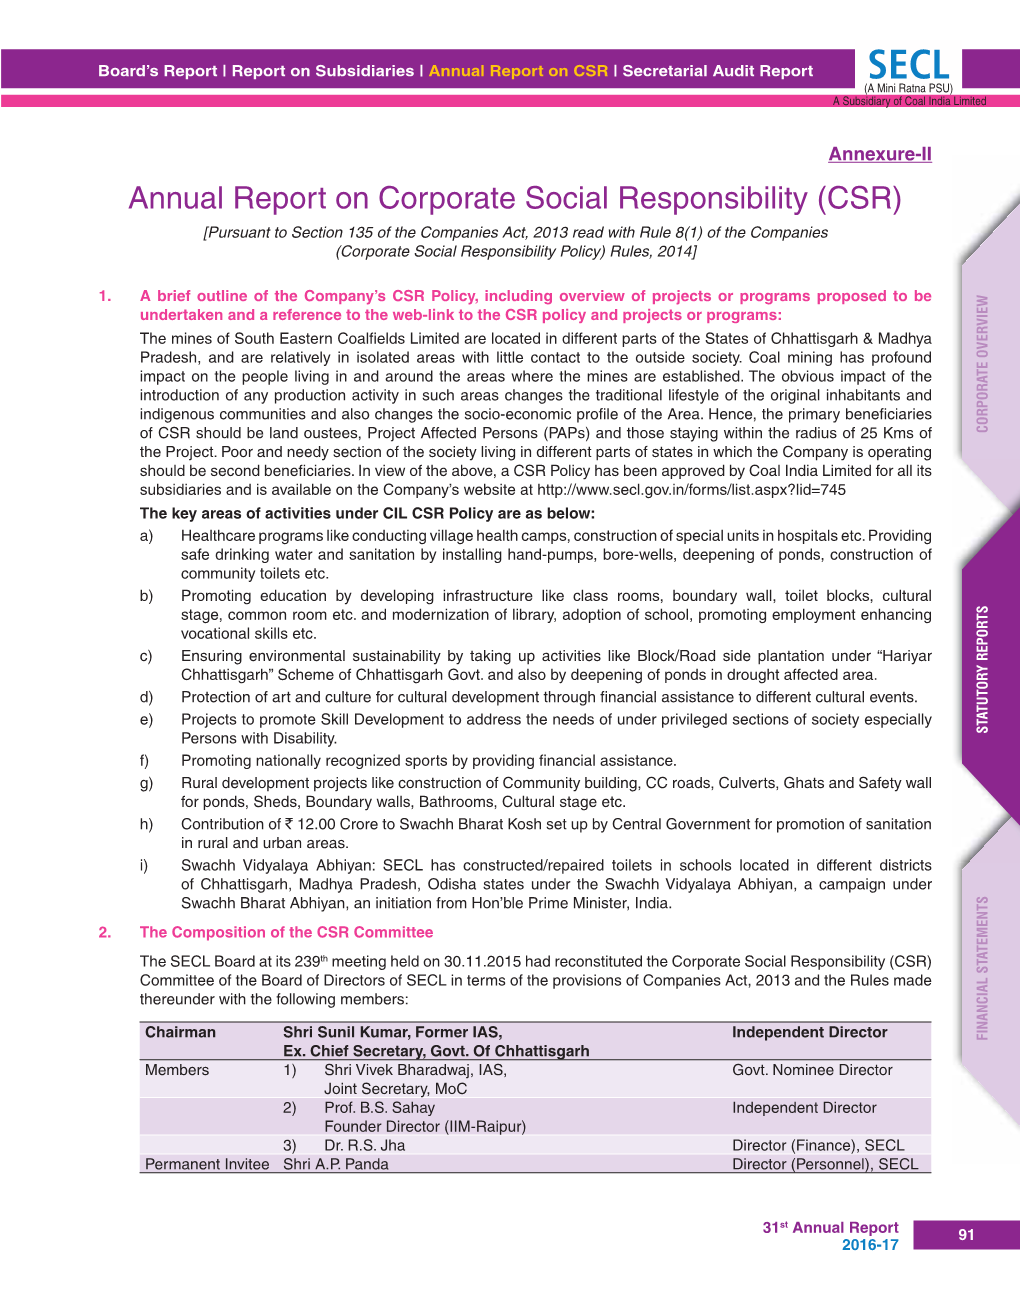 Annual Report on Corporate Social Responsibility (CSR)